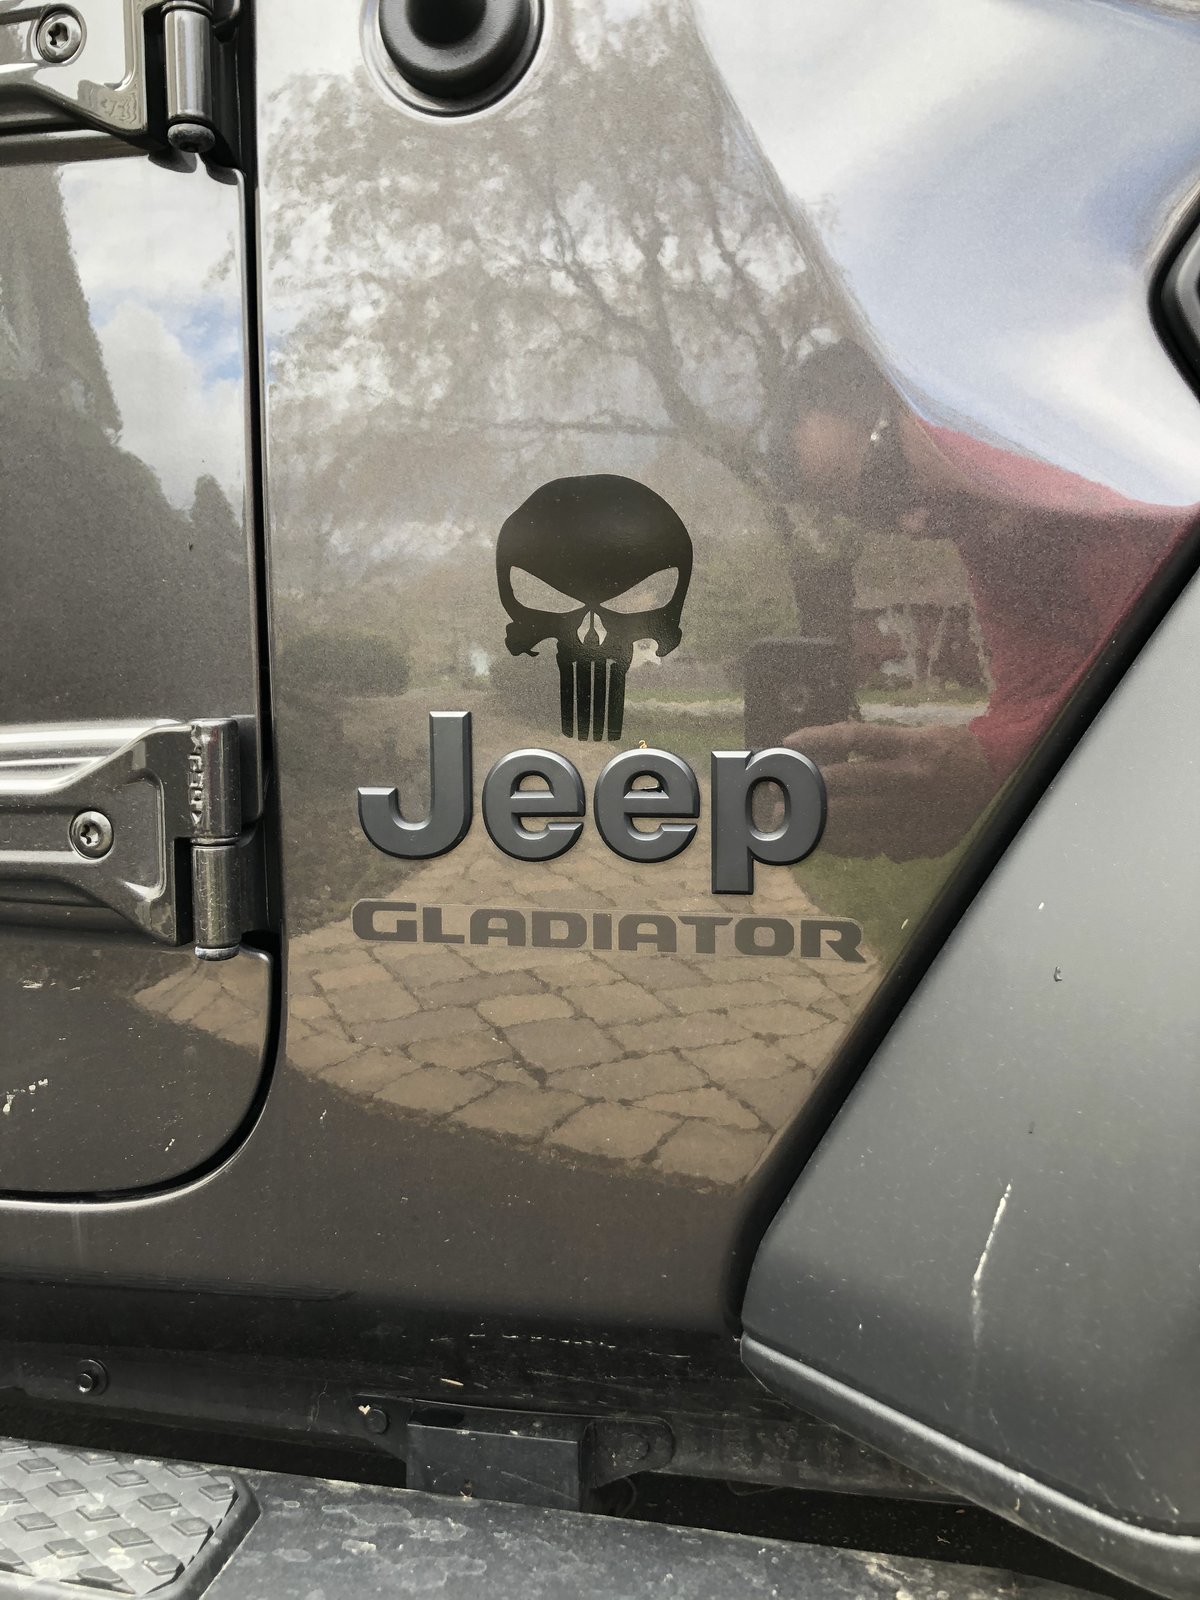 Jeep Gladiator Stickers and decal pics! IMG_20191209_094603